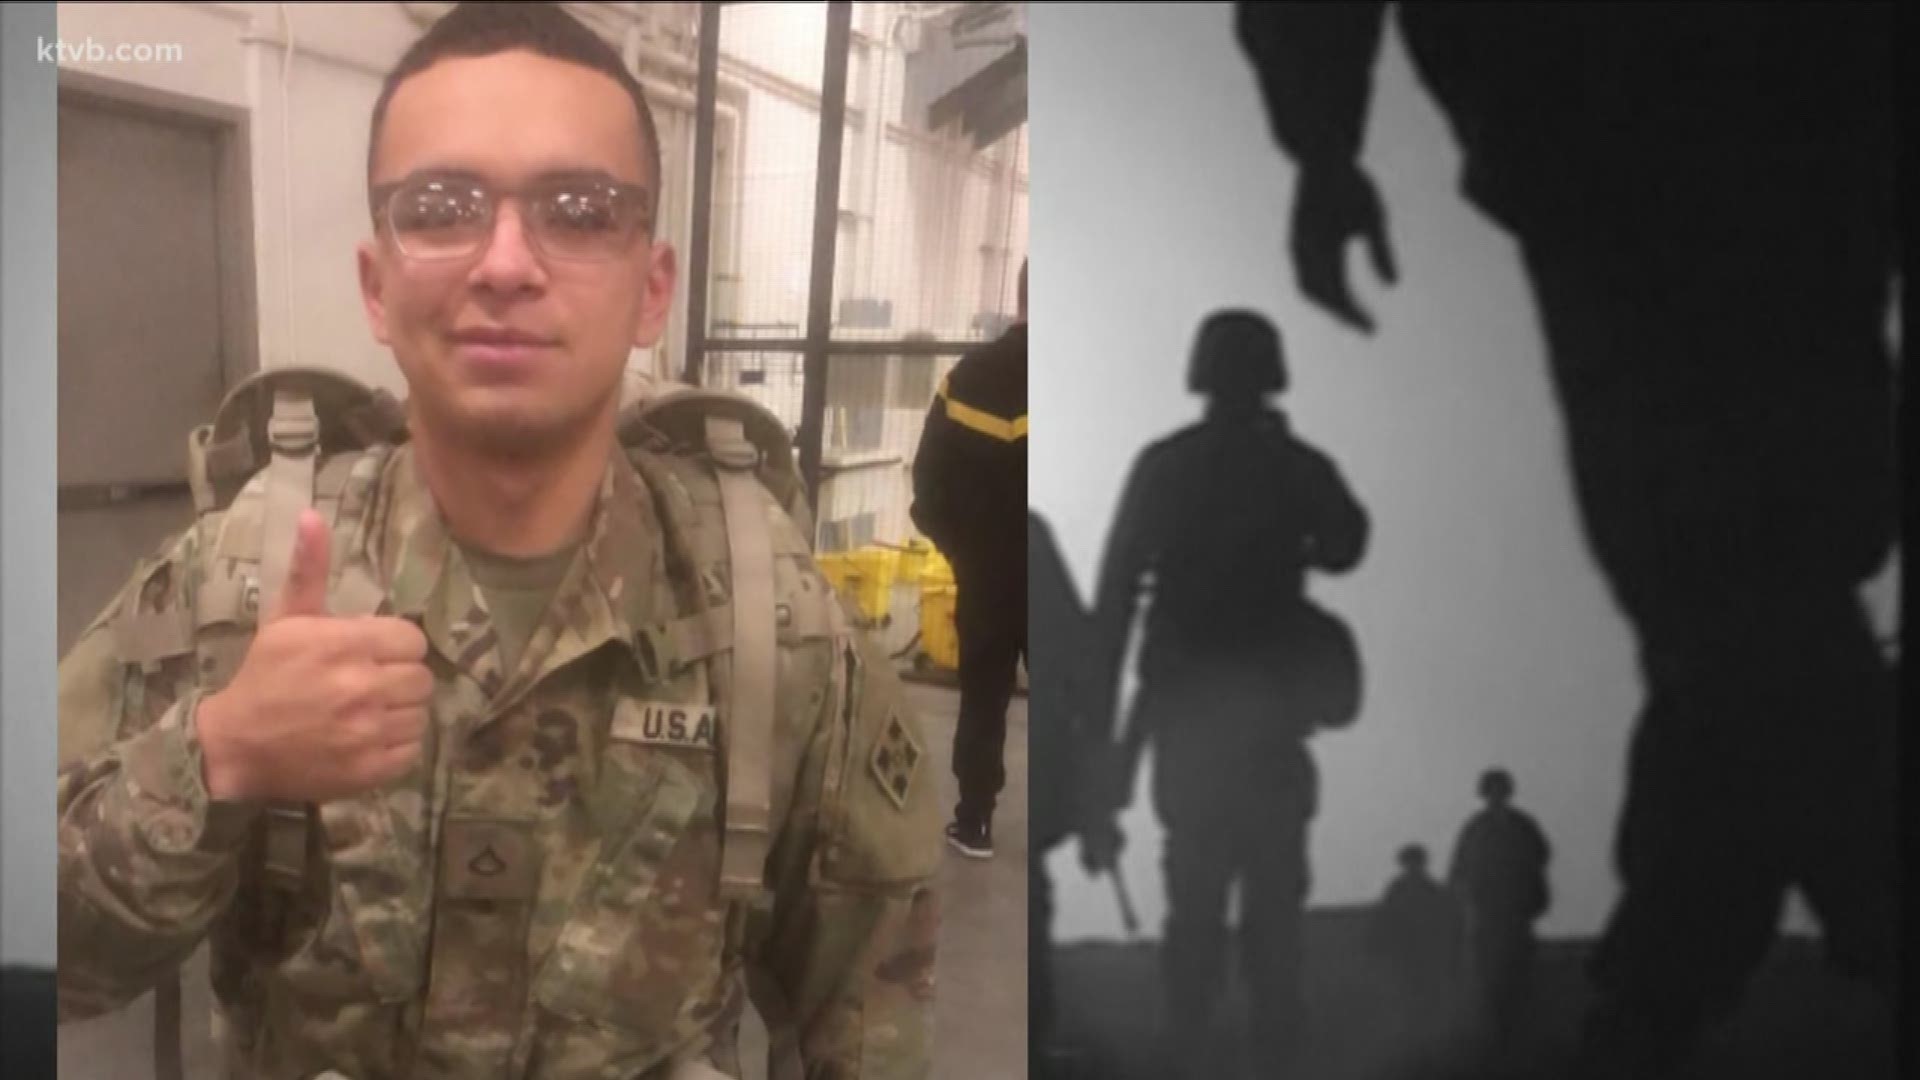 The Department of Defense says Spc. Michael T. Osorio died from noncombat-related injuries.